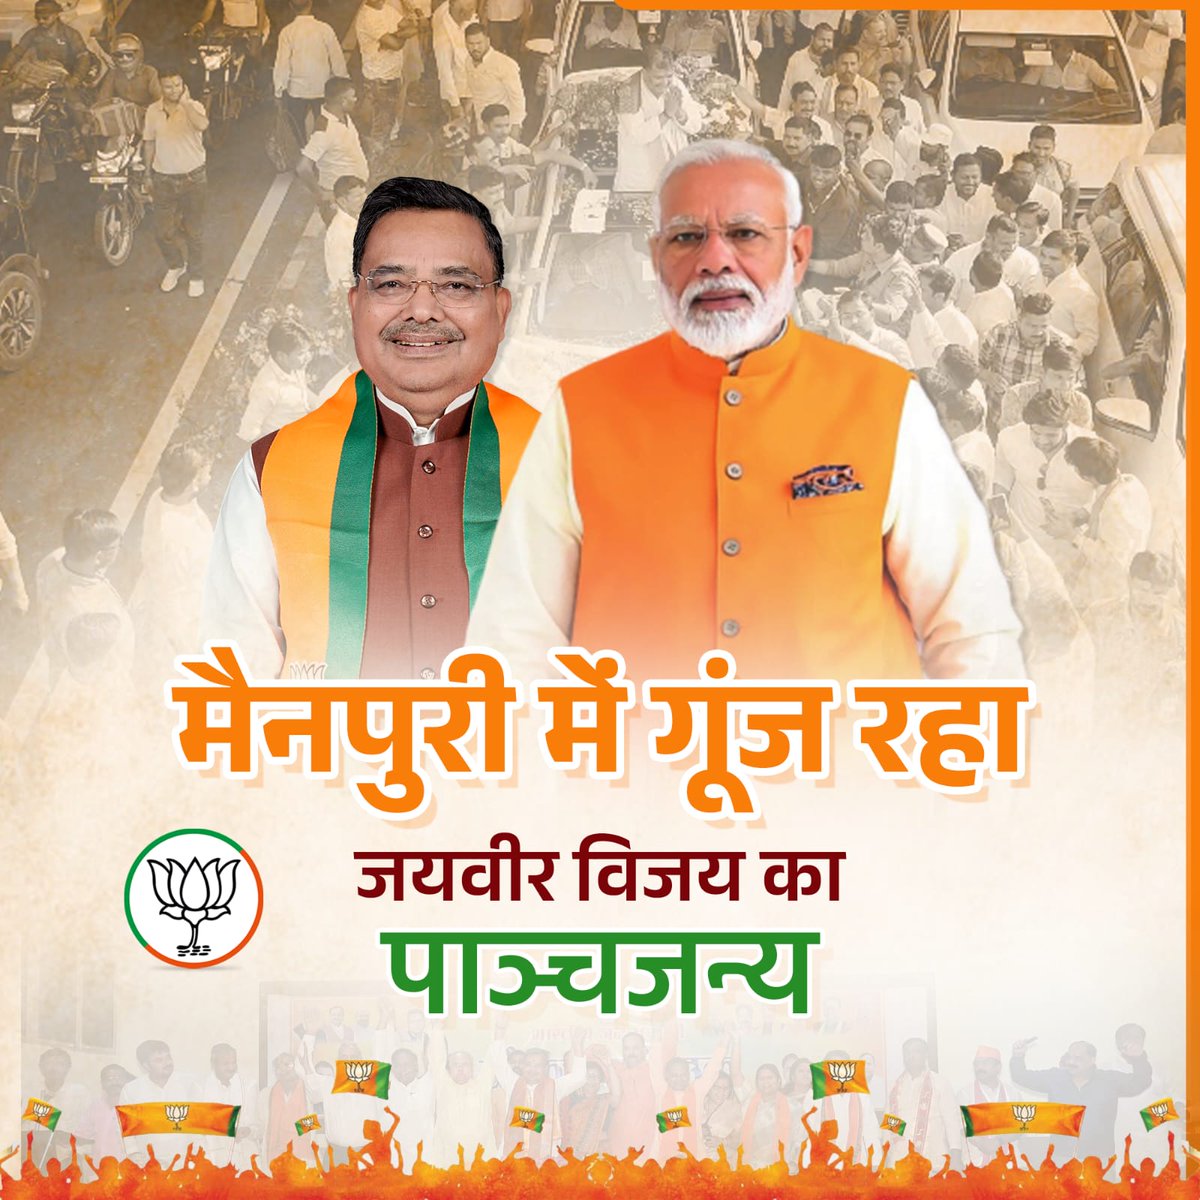 Mainpuri has seen the colors of Dimple Bhabhi and also the charisma of SP government, that is why this time Mainpuri is with Vikas, Mainpuri is with BJP, Mainpuri is with Jaiveer.
#MainpuriMangeModi